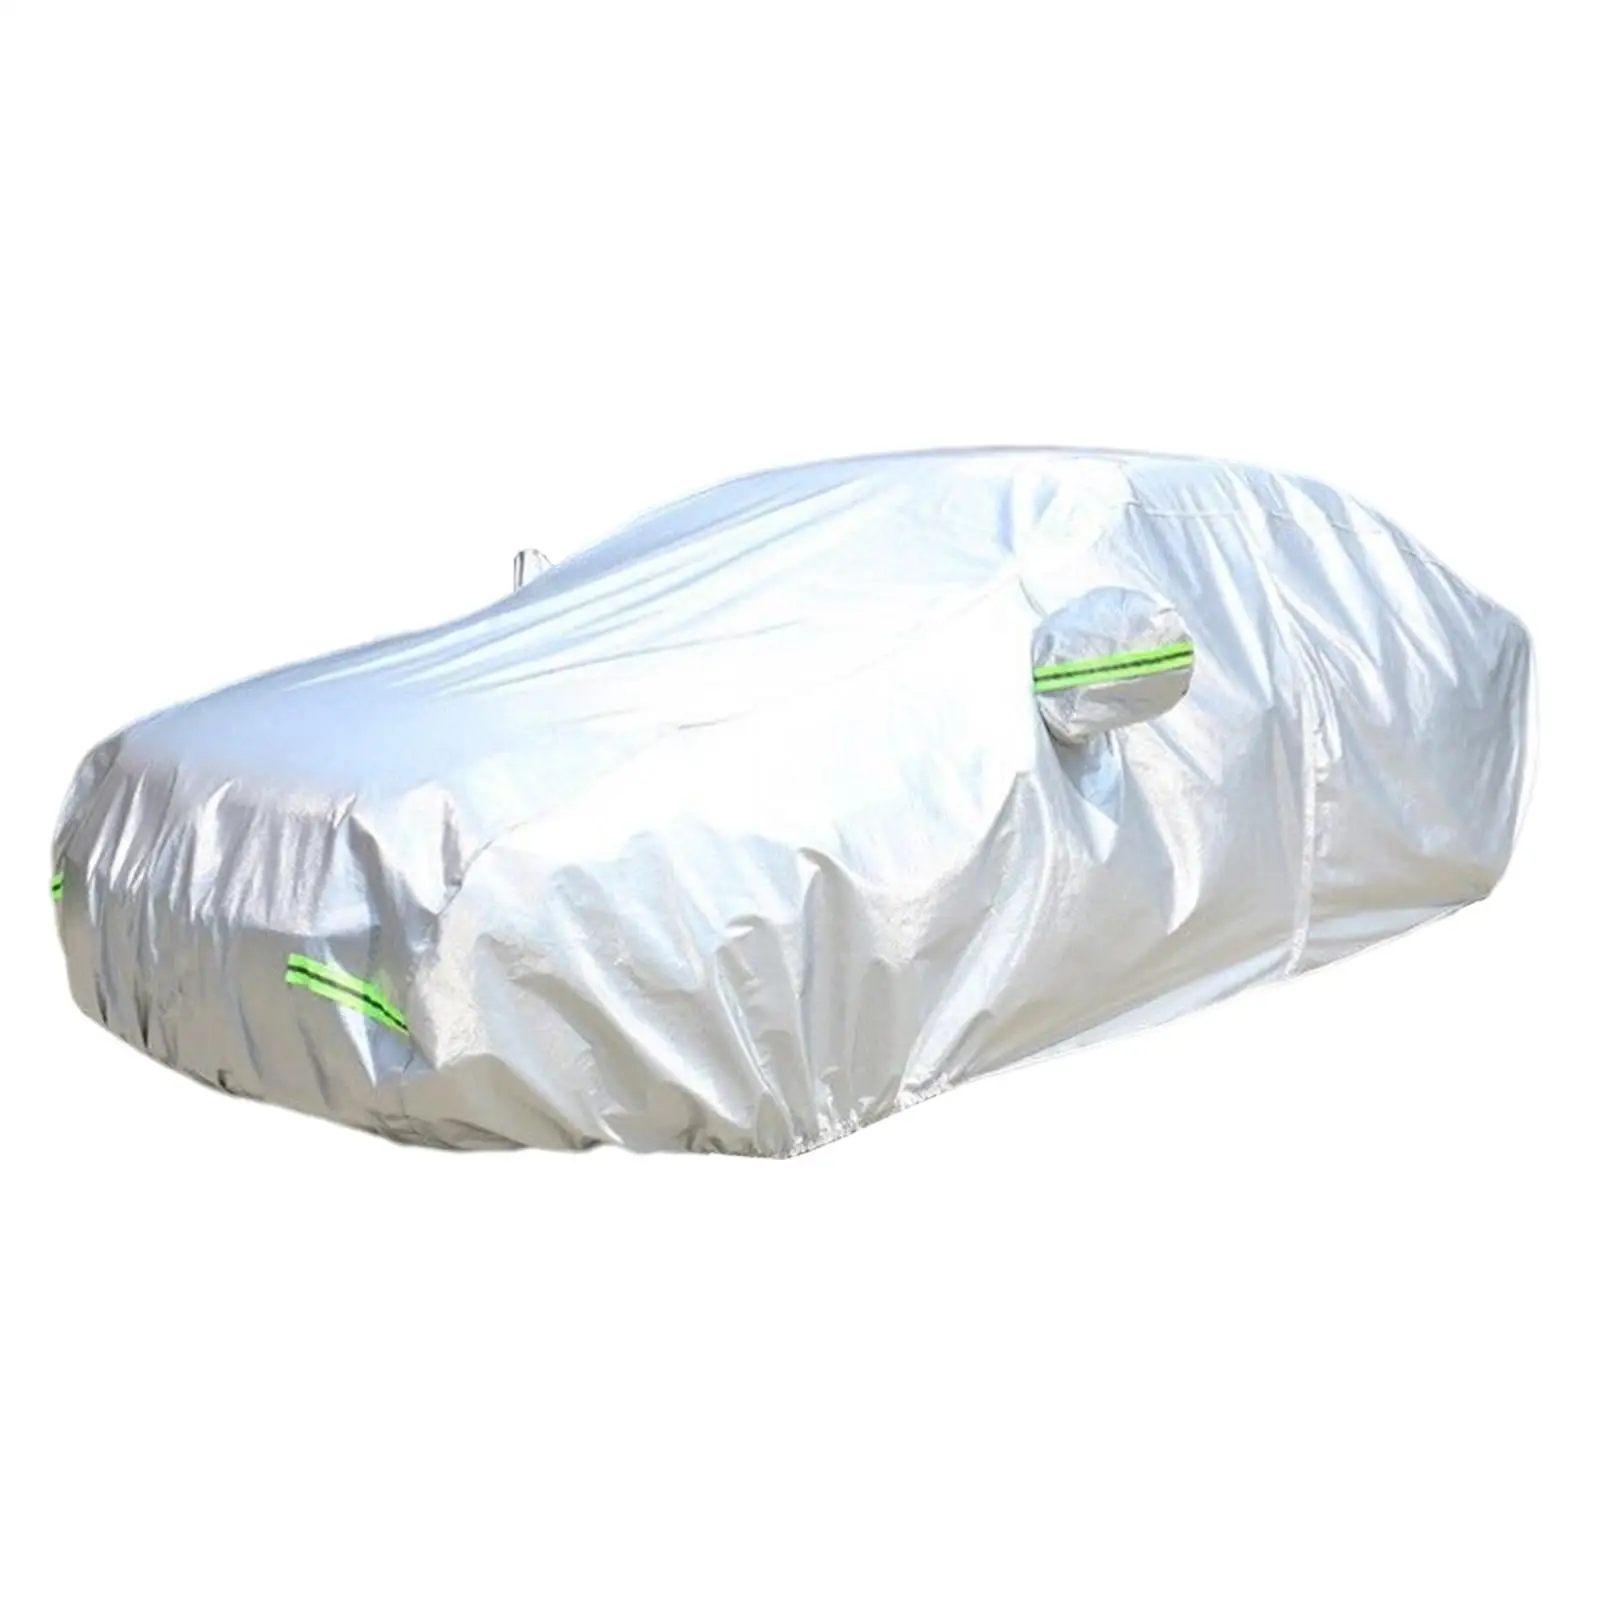 Thicken Oxford Cloth Car Cover Waterproof Sun Shade Protection Cover for Byd Atto 3 Yuan Plus